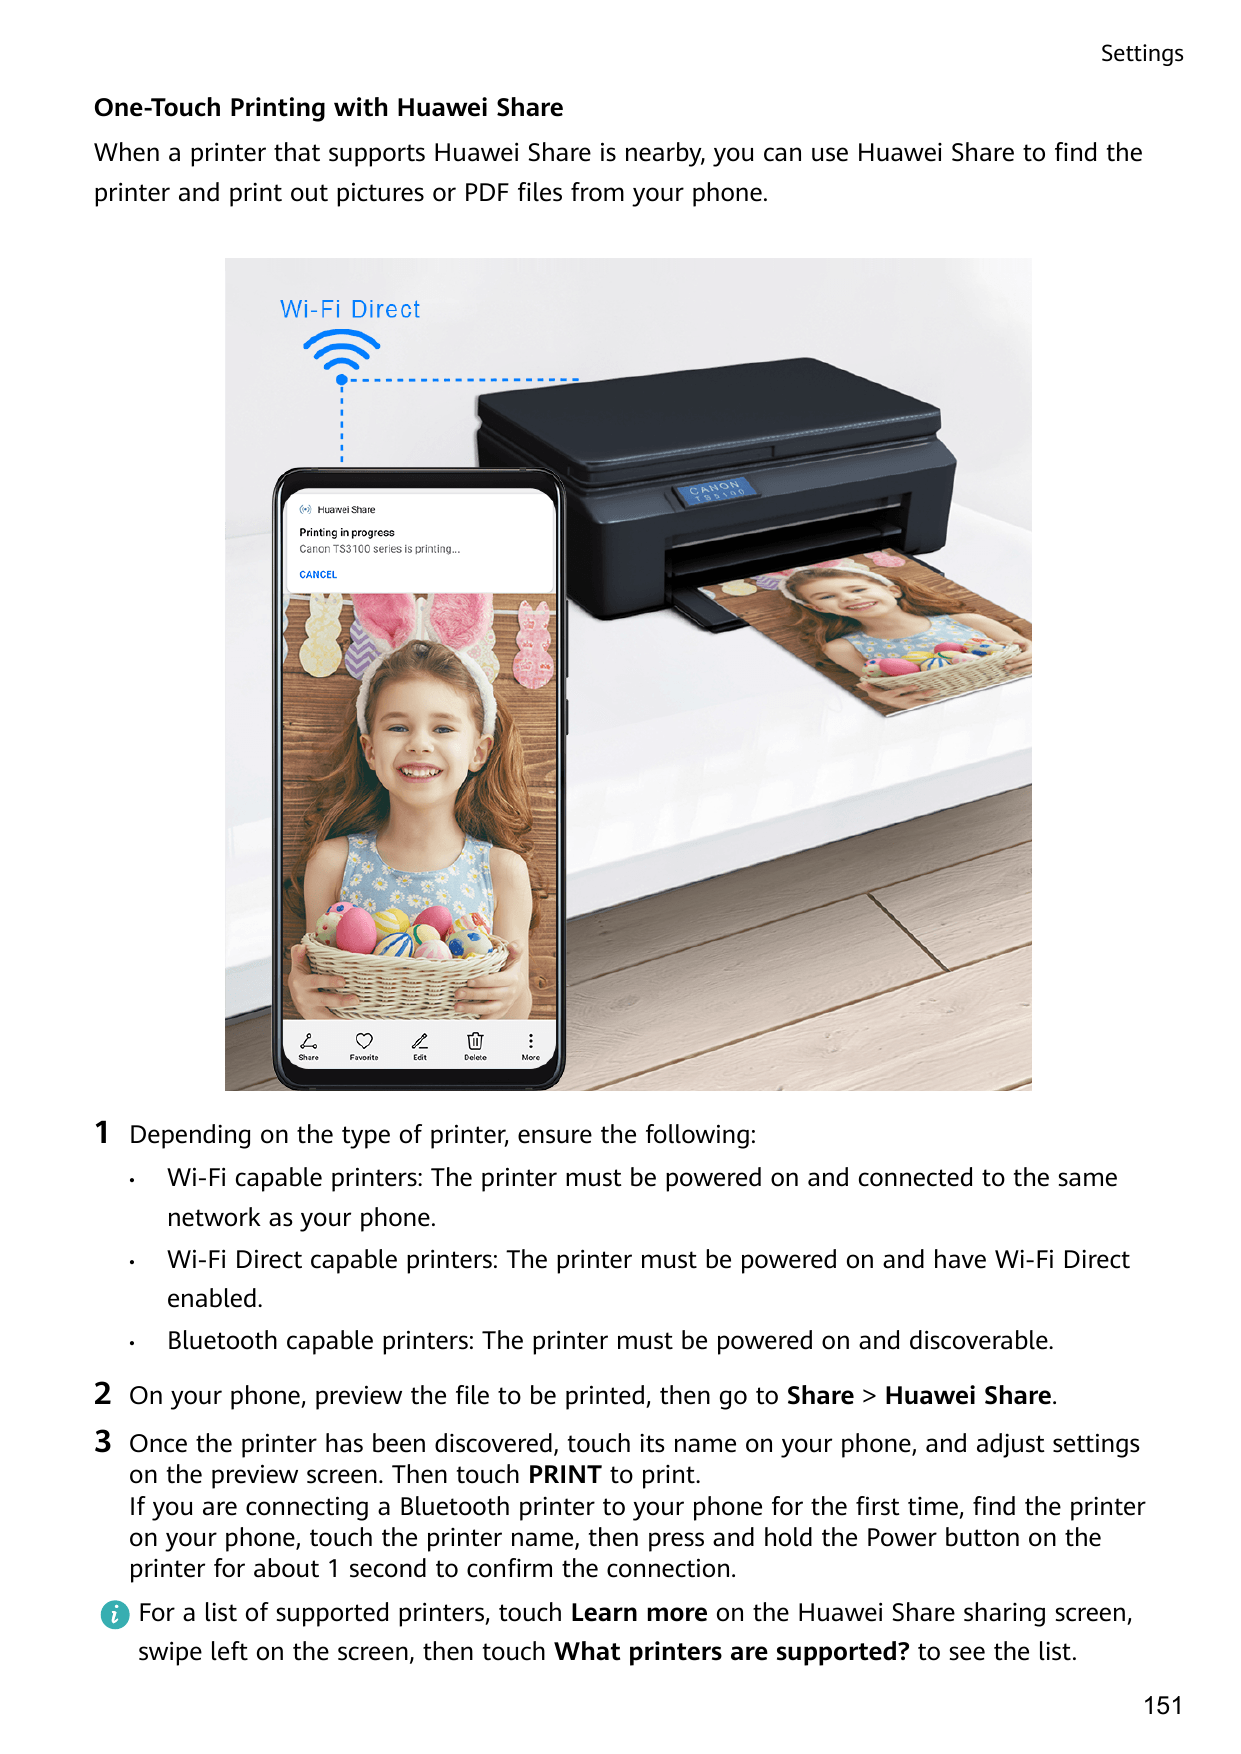 SettingsOne-Touch Printing with Huawei ShareWhen a printer that supports Huawei Share is nearby, you can use Huawei Share to fin